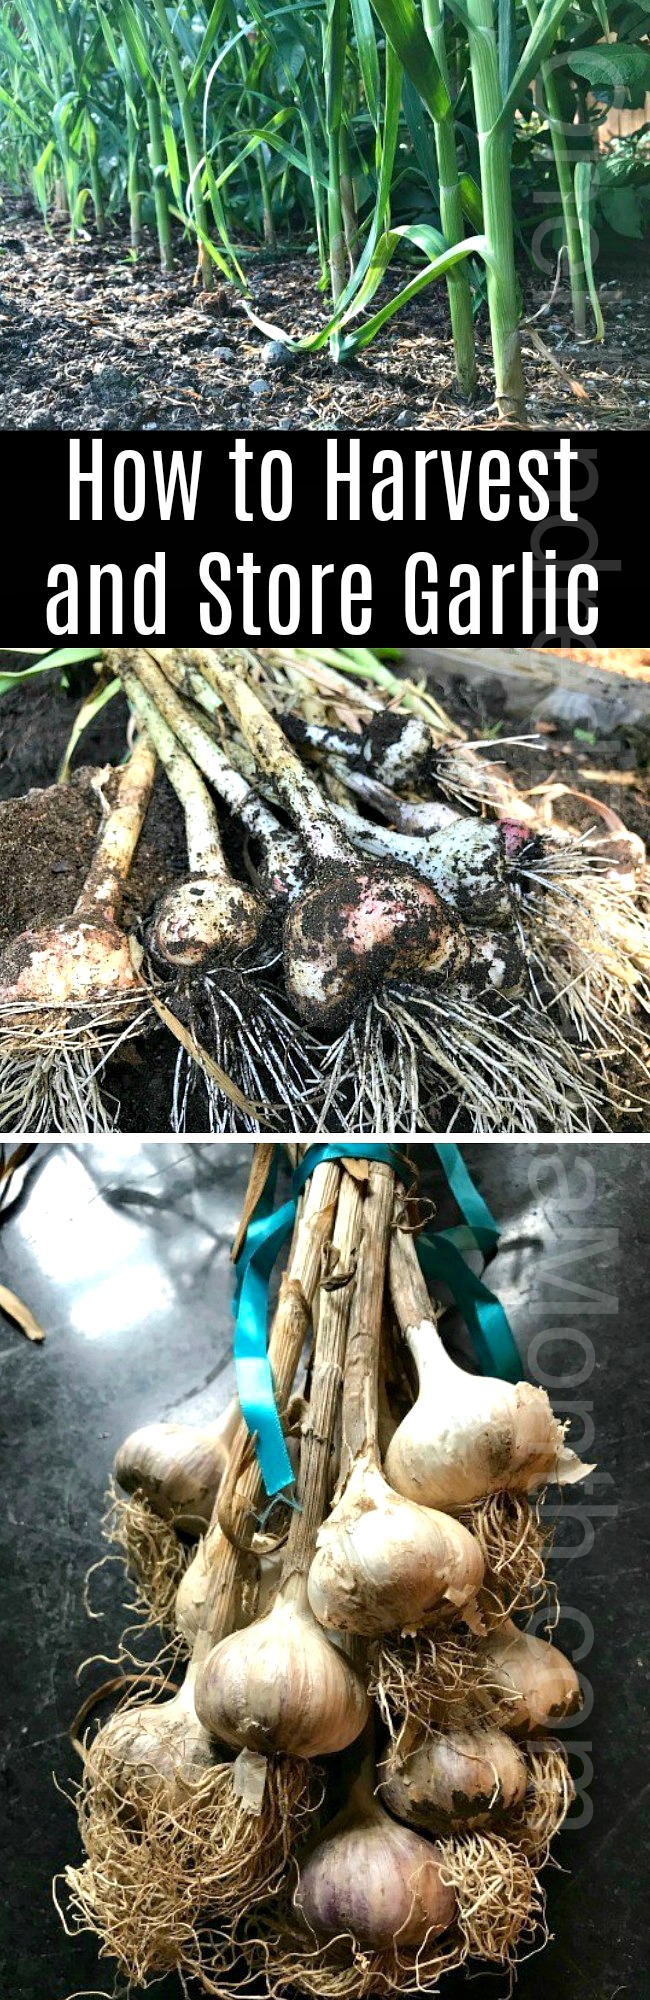 How to Harvest and Store Garlic